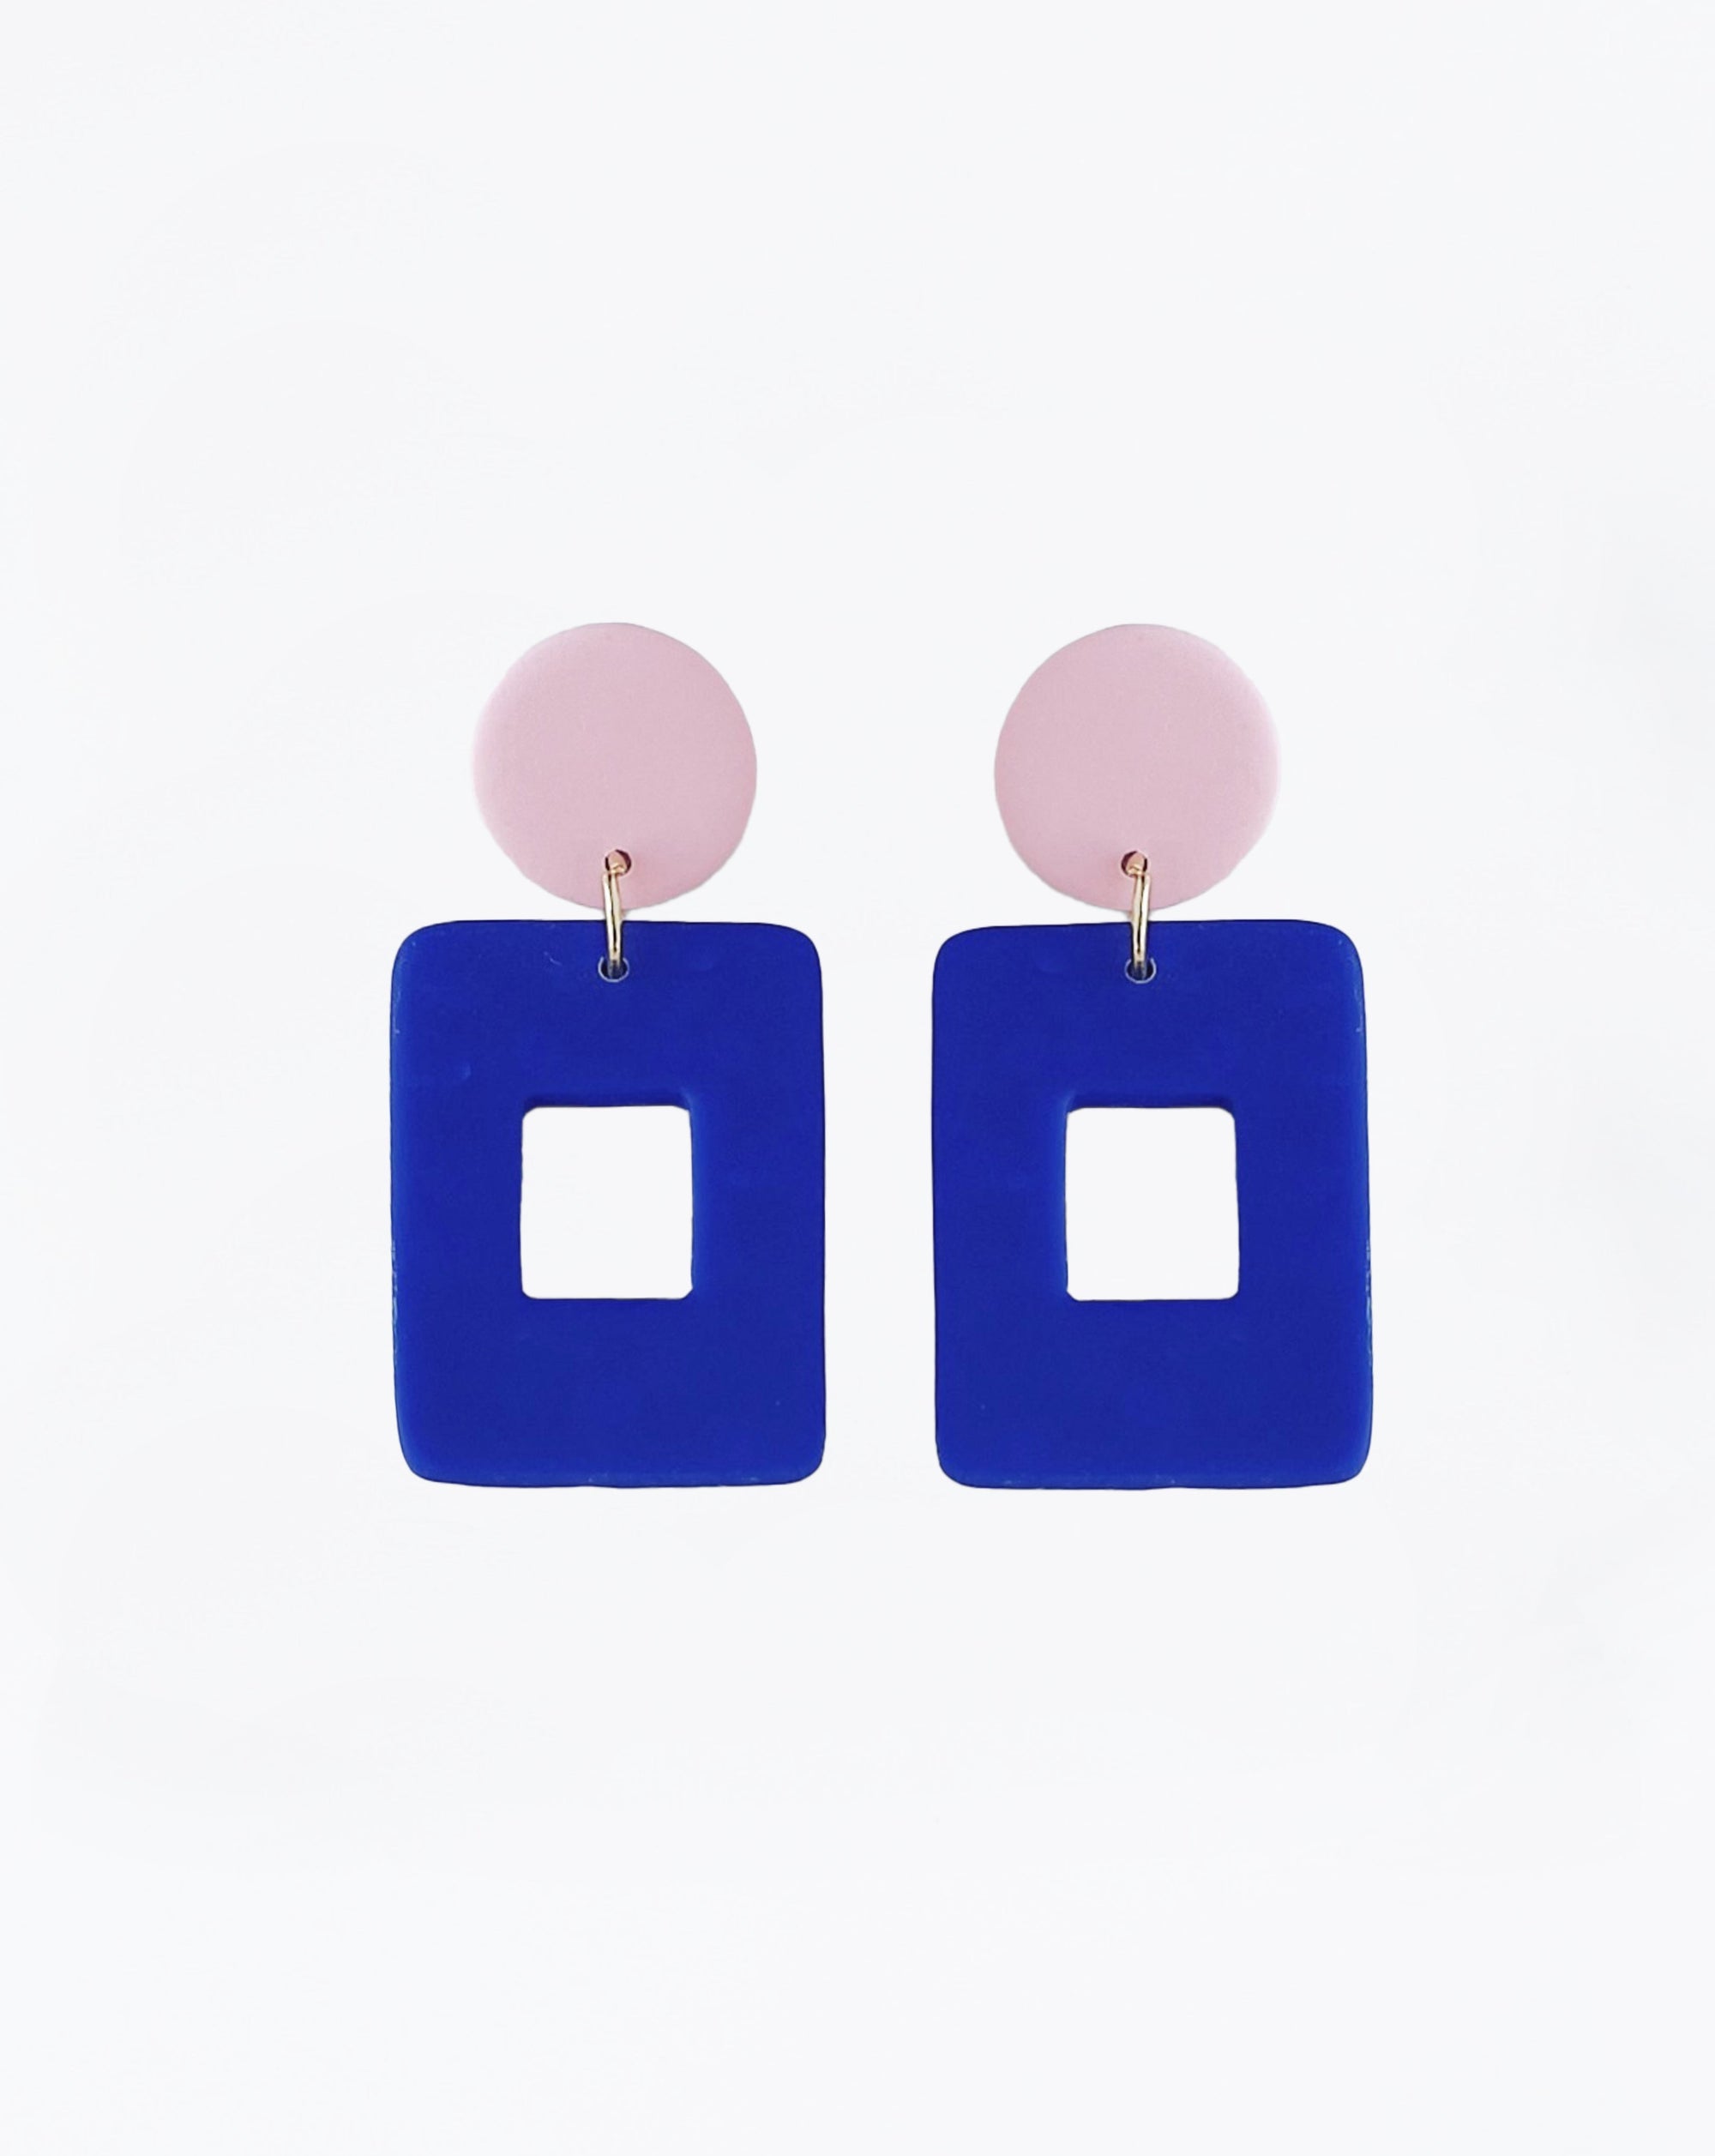 Muna earrings in Hue Blue color, front view